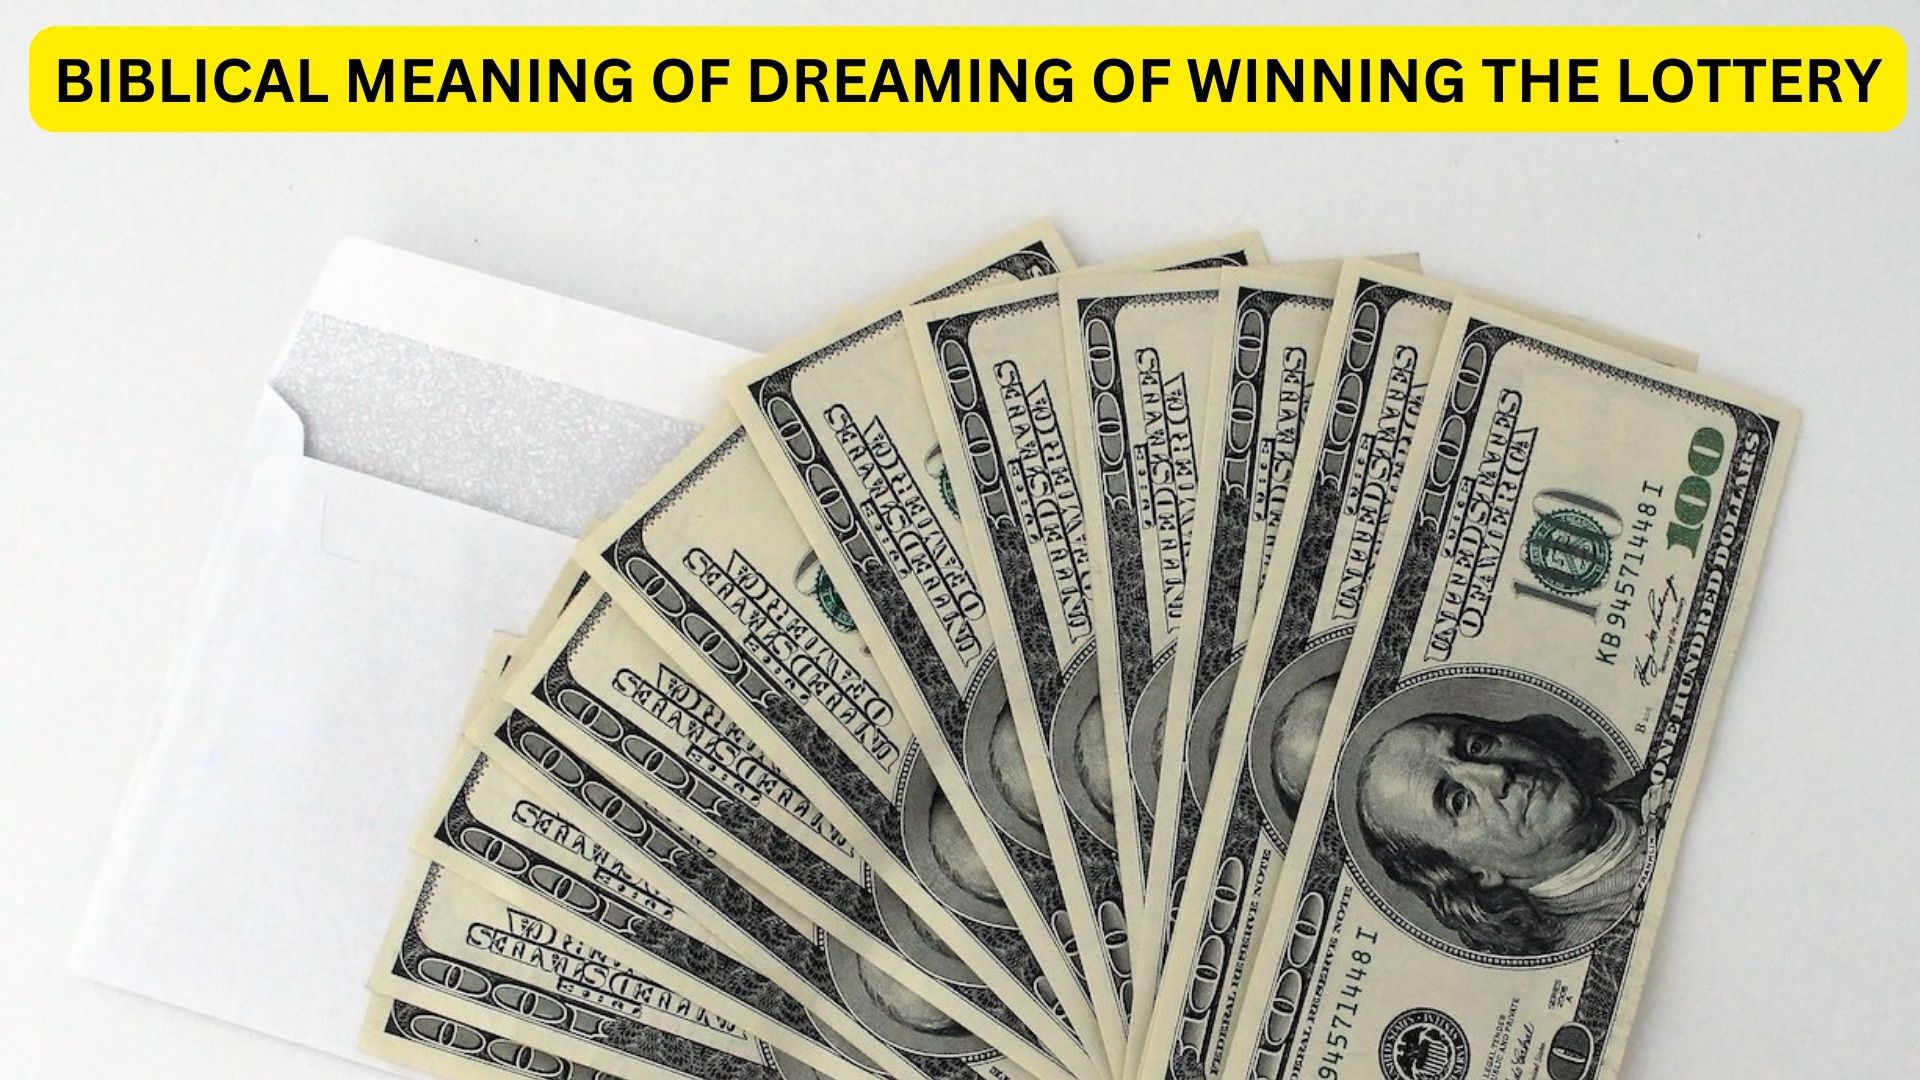 Biblical Meaning Of Dreaming Of Winning The Lottery - Symbolizes Pleasant Happenings